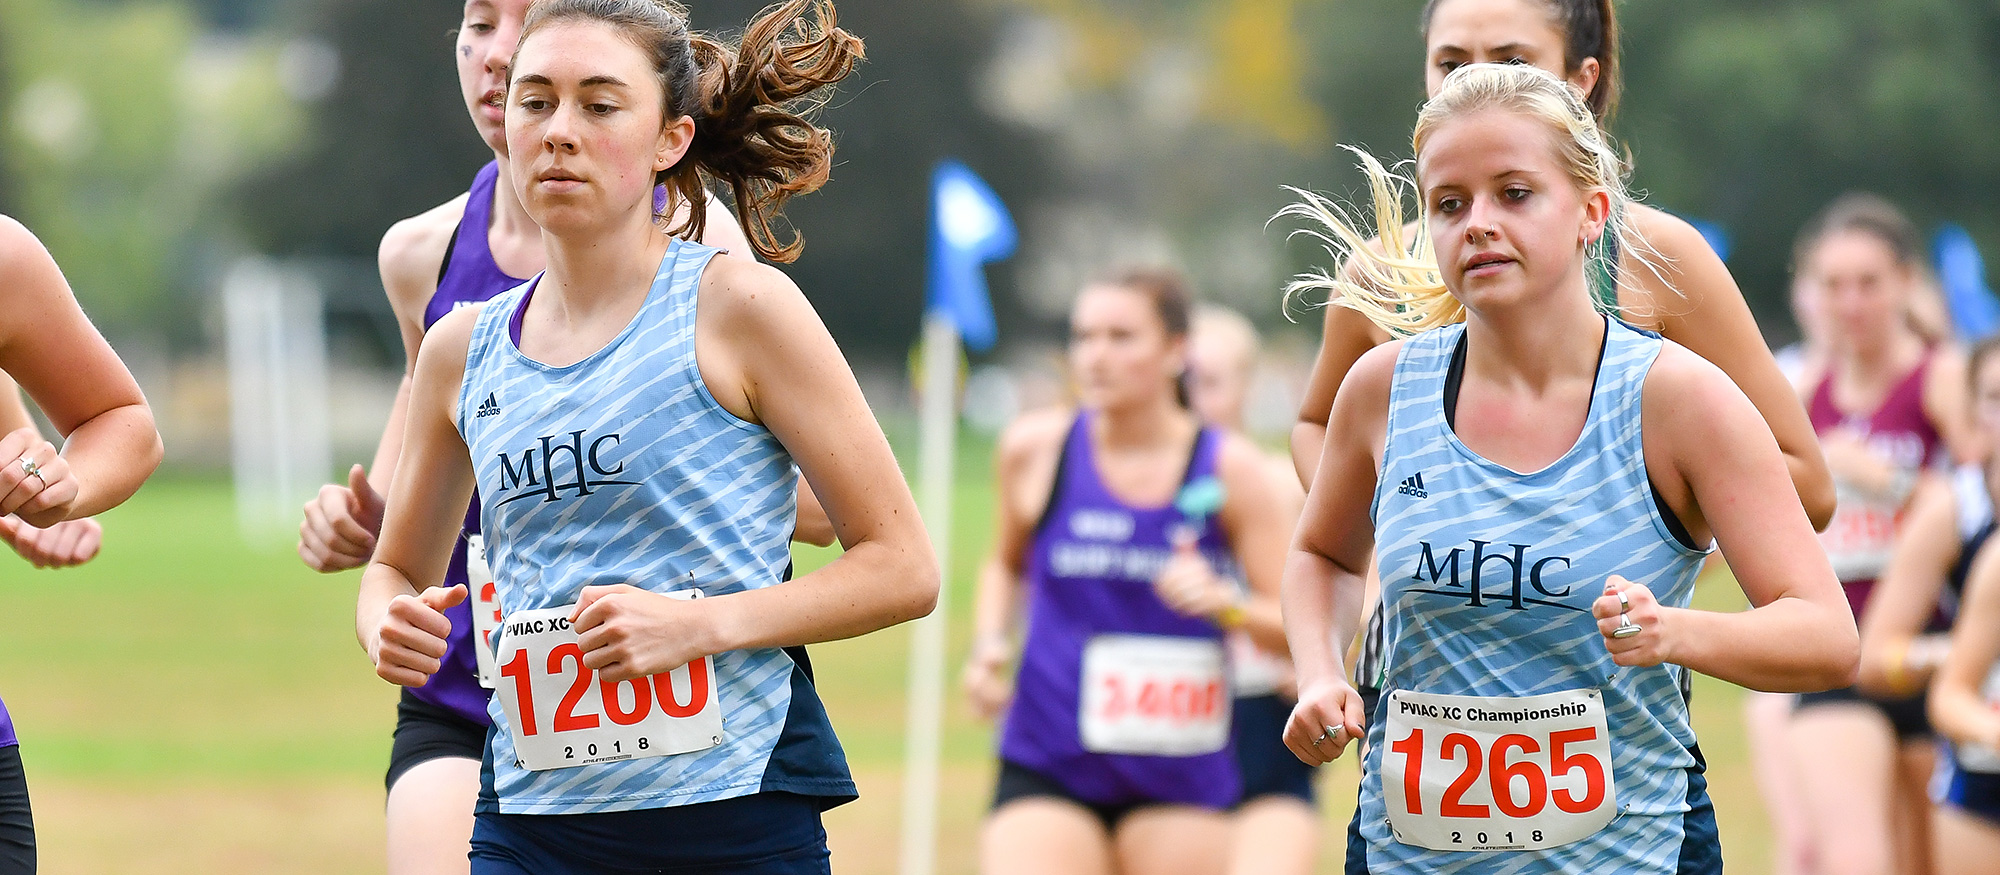 Lily Nemirovsky (left) and Greta Trapp (right) finished fourth and third for Mount Holyoke, respectively, with big personal-best times at the Purple Valley Classic on Oct. 1, 2022. (RJB Sports file photo)